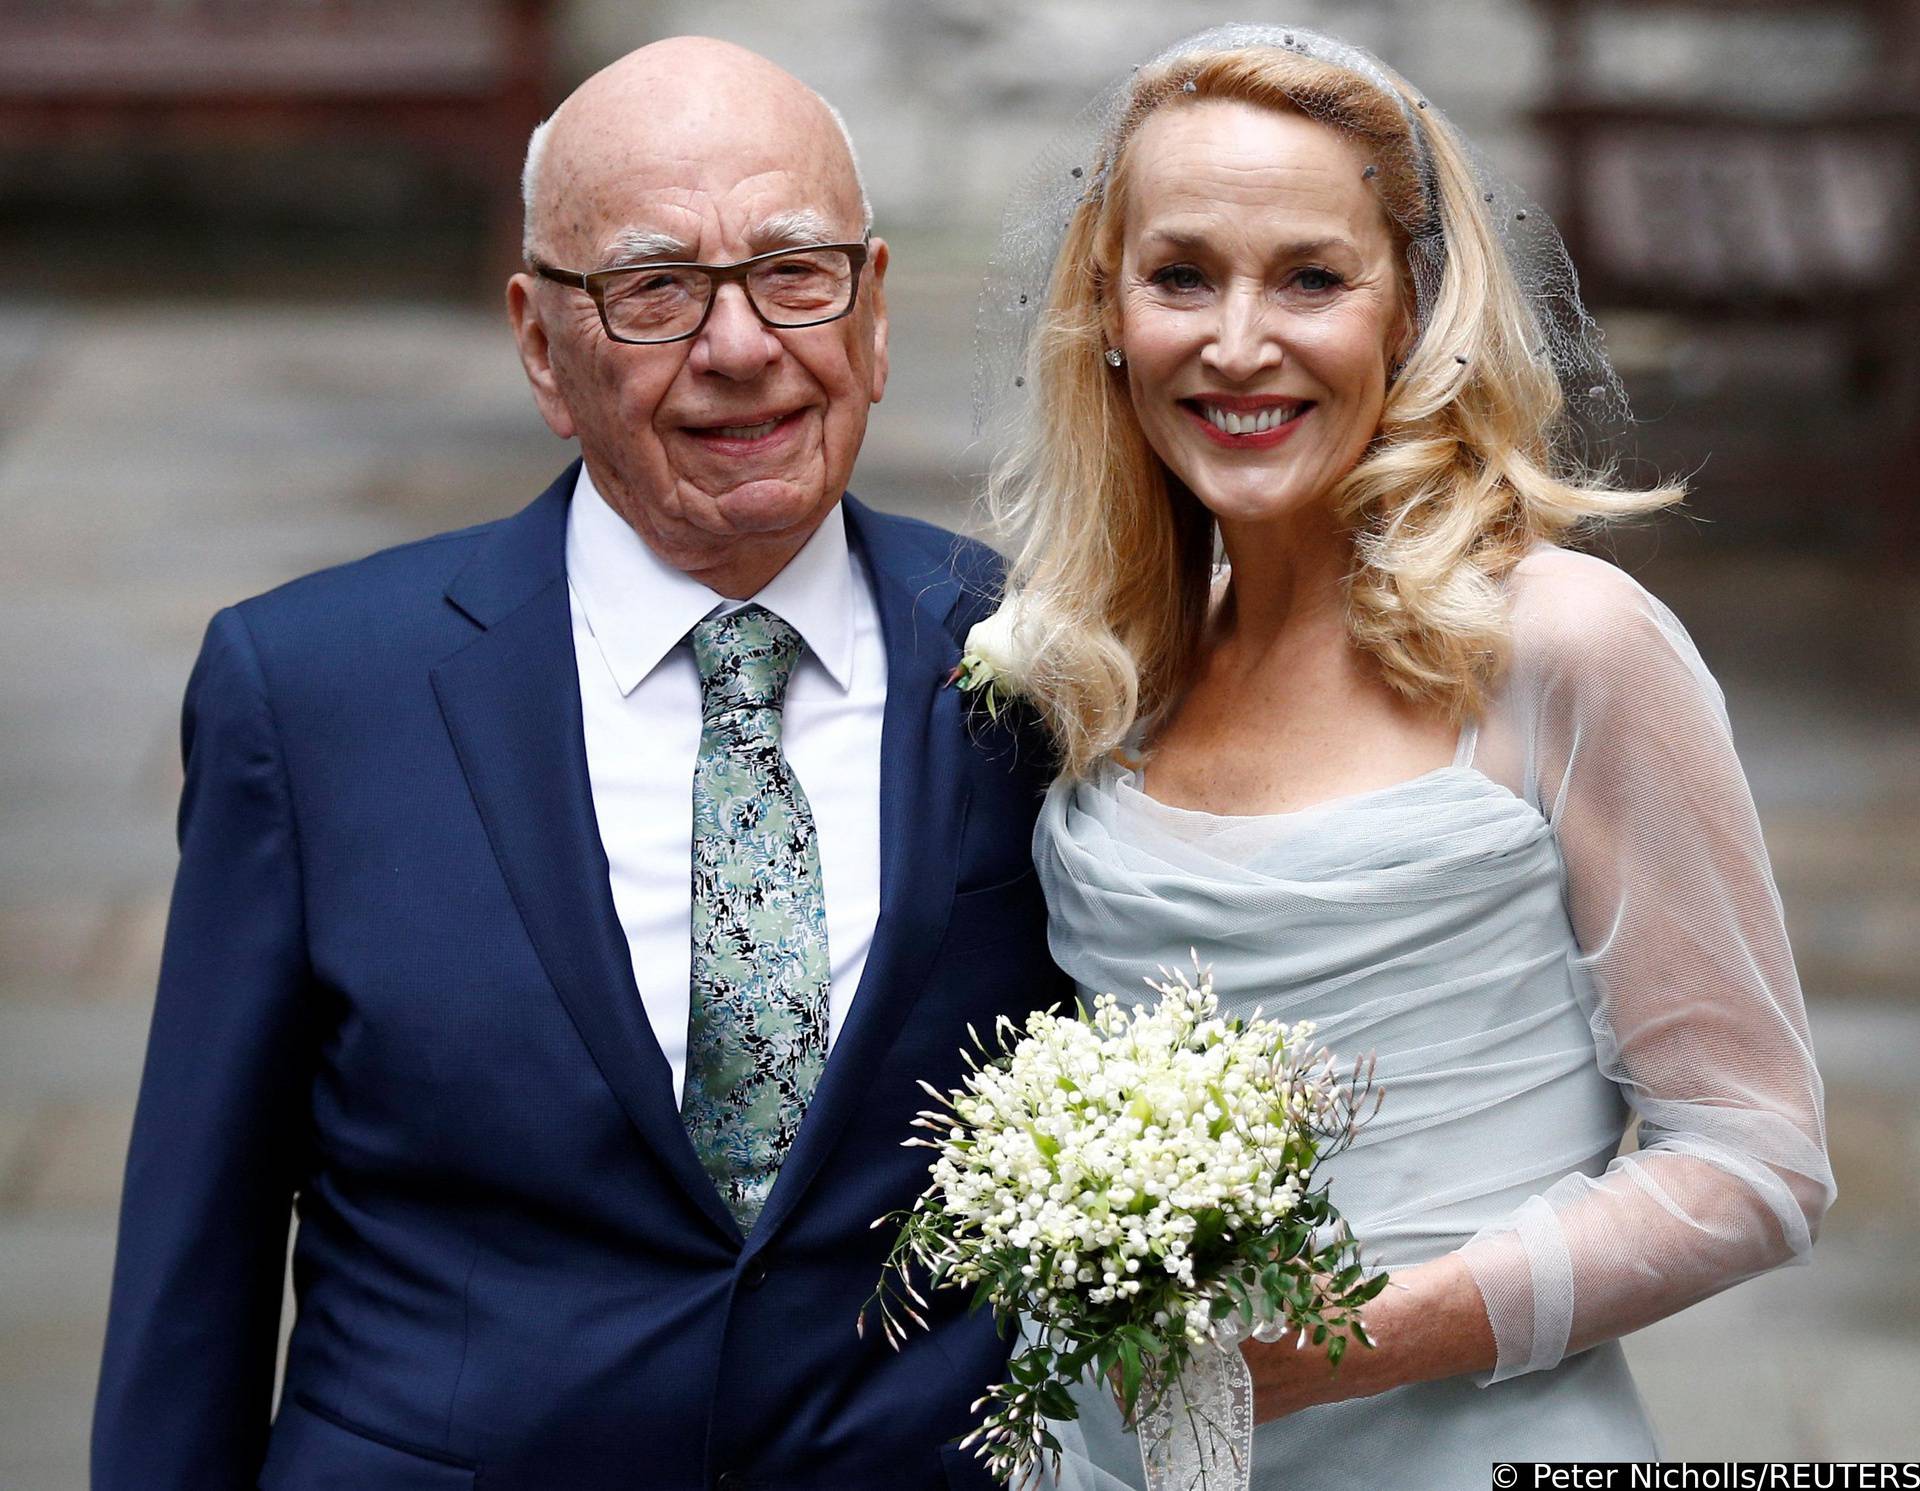 FILE PHOTO: Media Mogul Rupert Murdoch and former supermodel Jerry Hall pose for a photograph outside St Bride's church following a service to celebrate their wedding which took place on Friday, in London